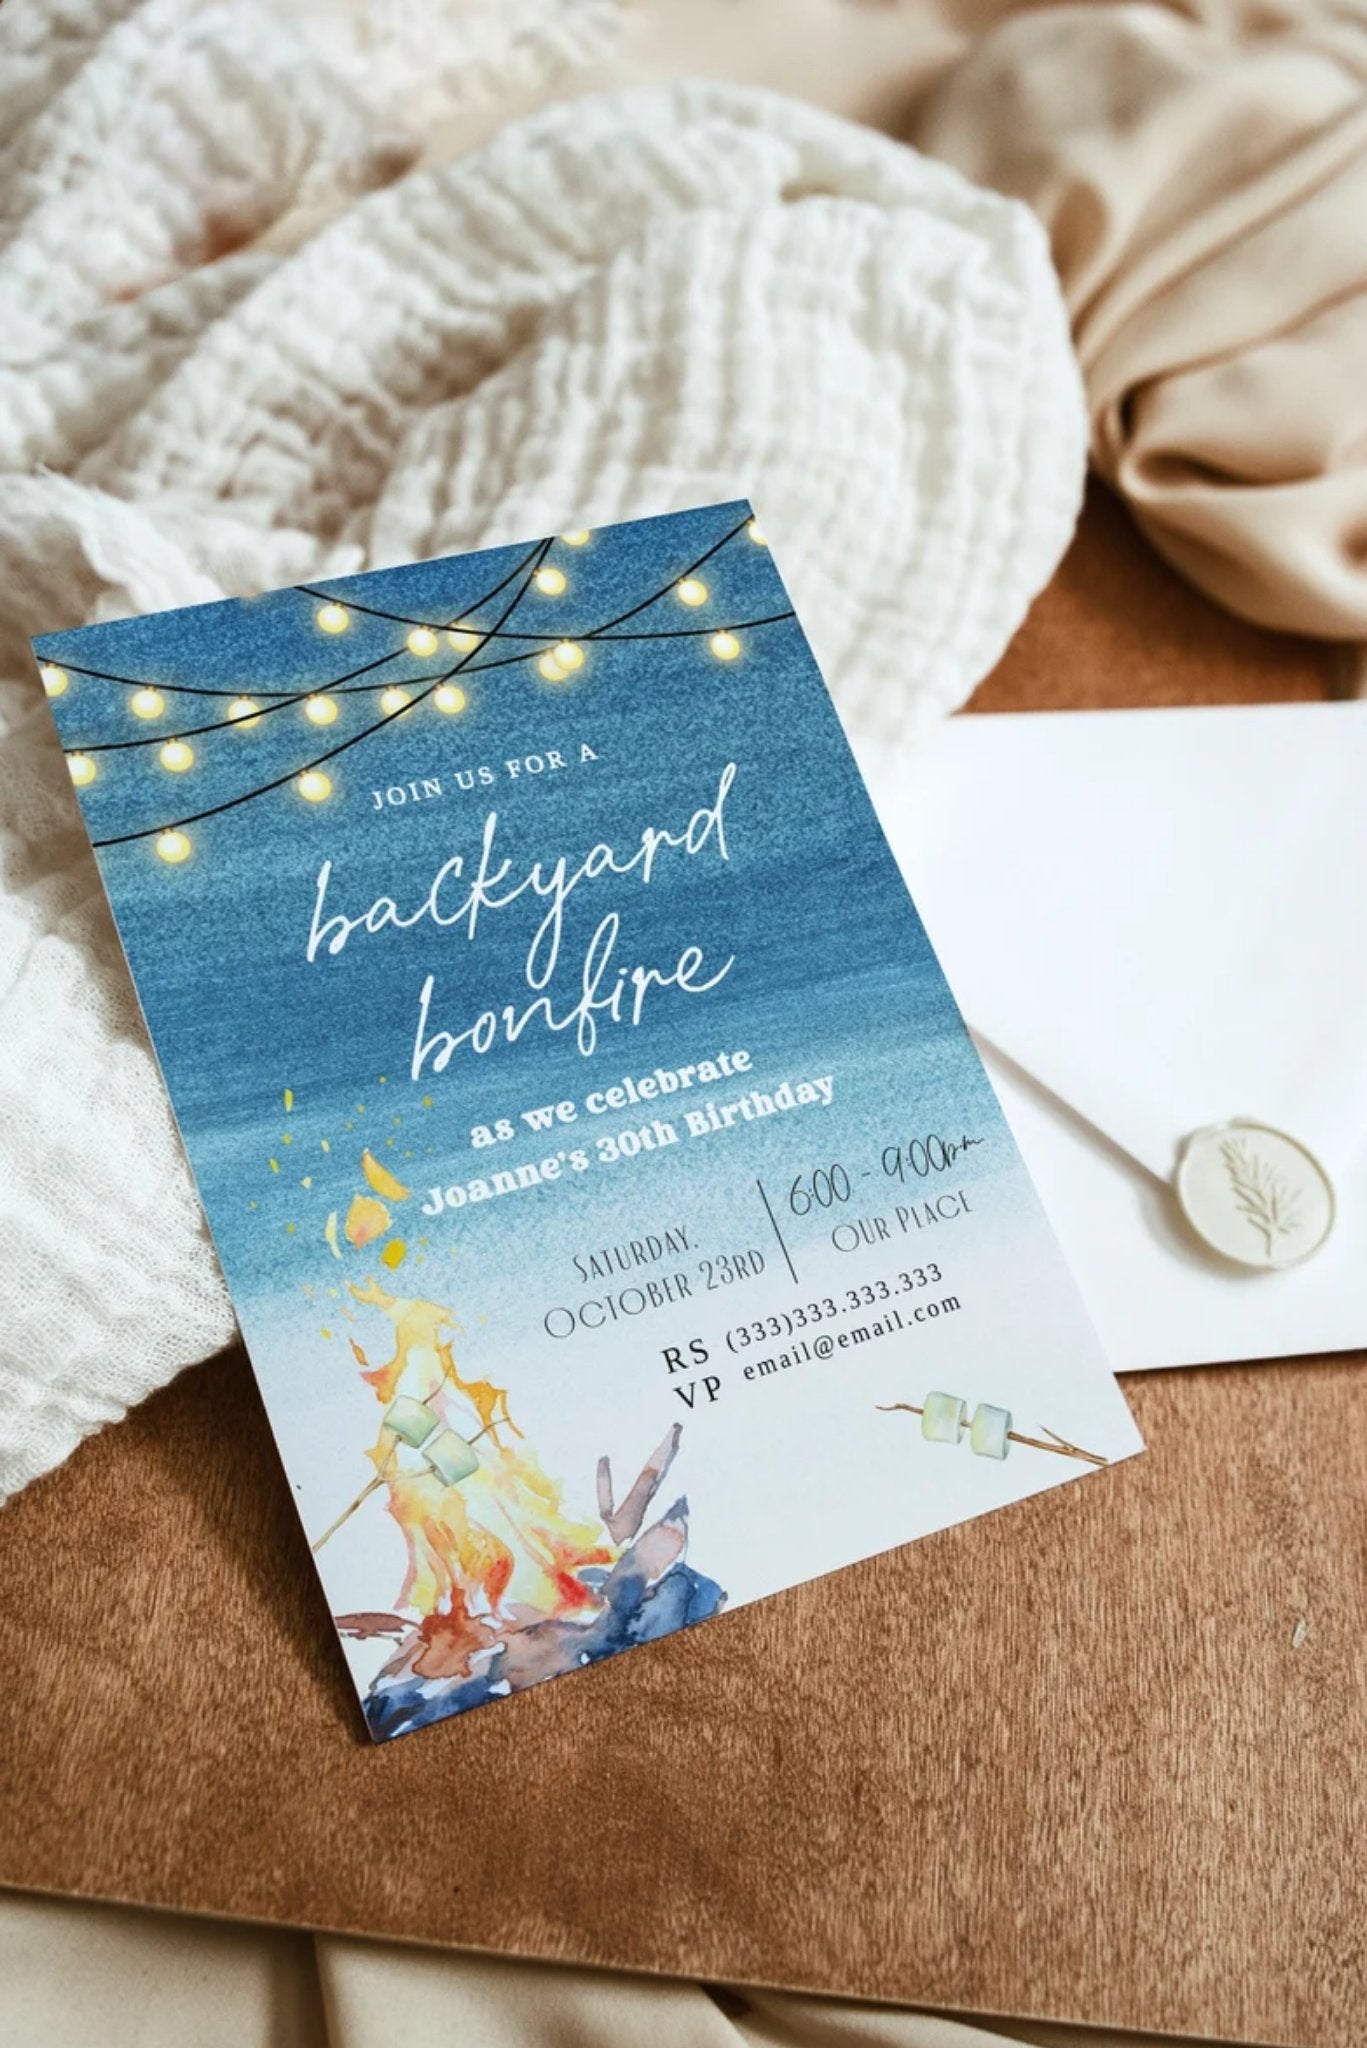 Backyard Party Guide - Pretty Collected